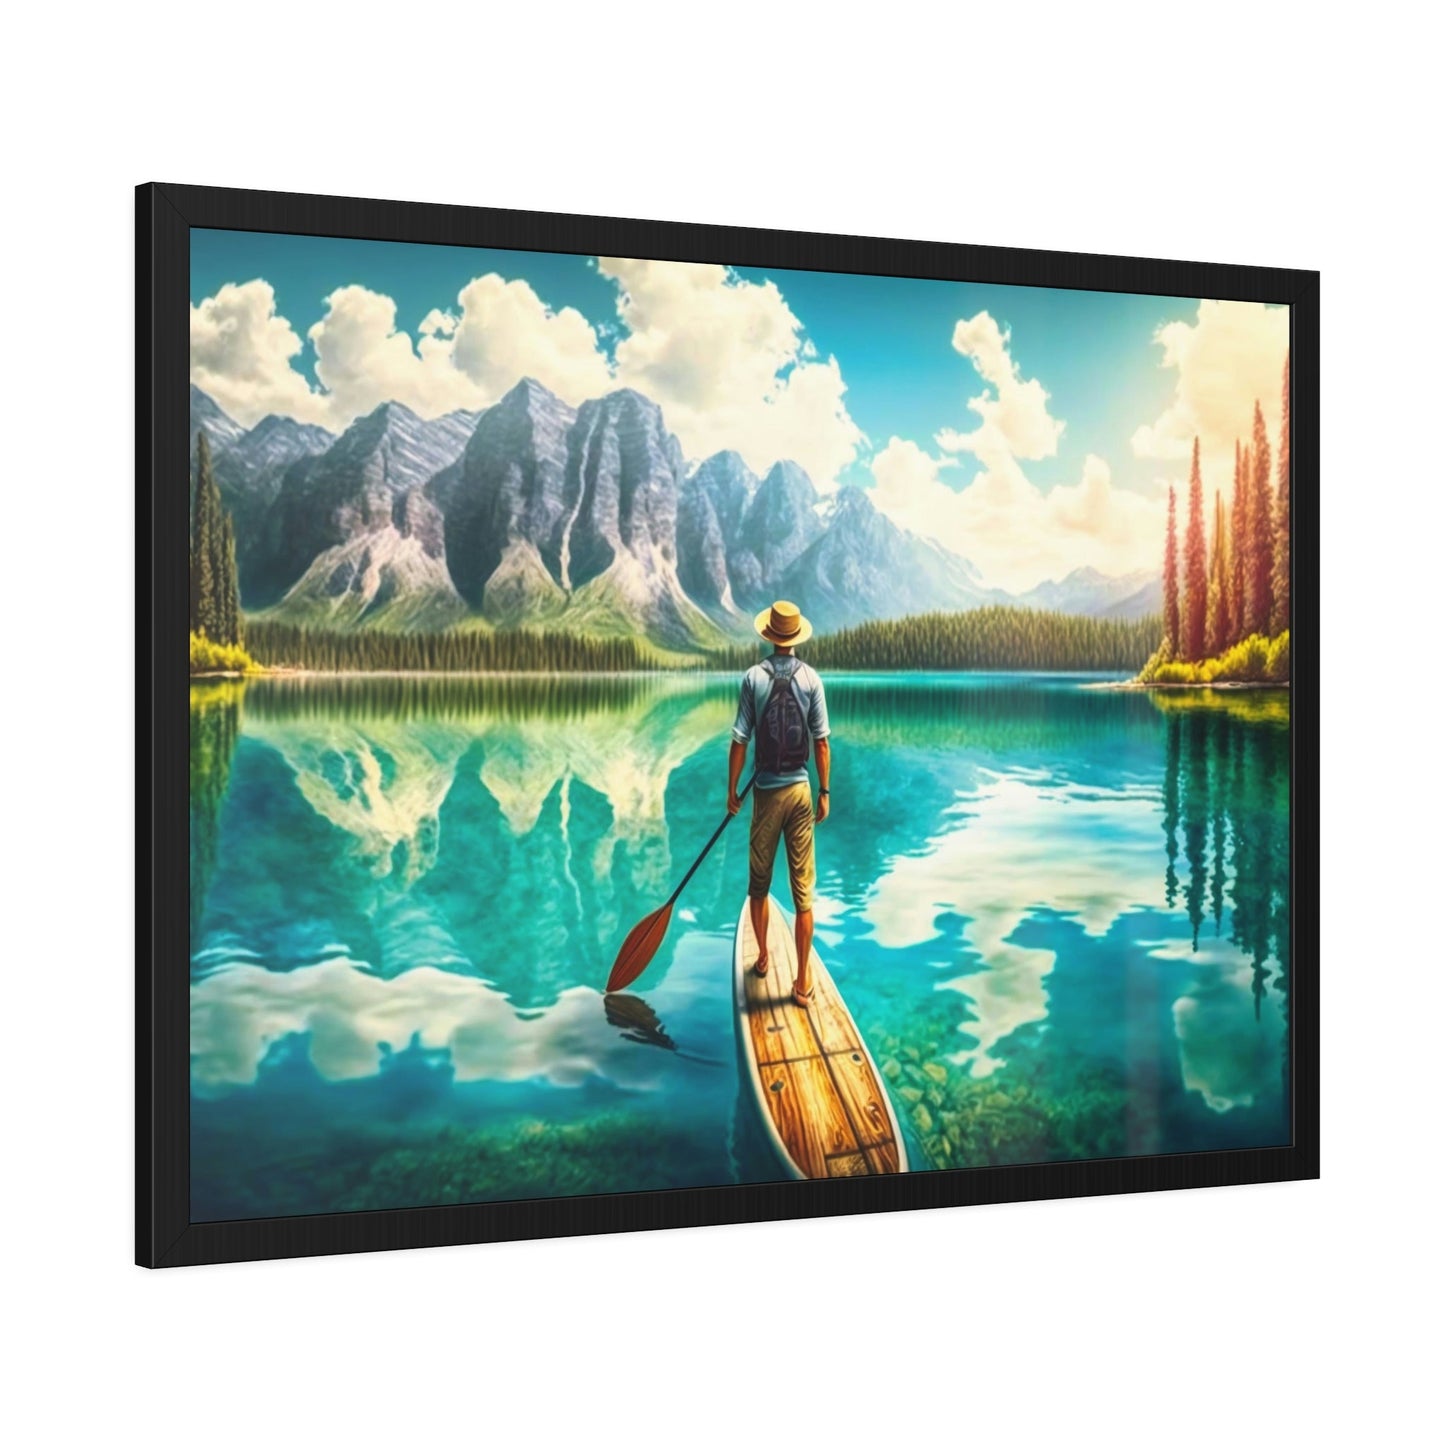 Scenic Riverscape: Wall Art of a Stunning River Landscape on Canvas